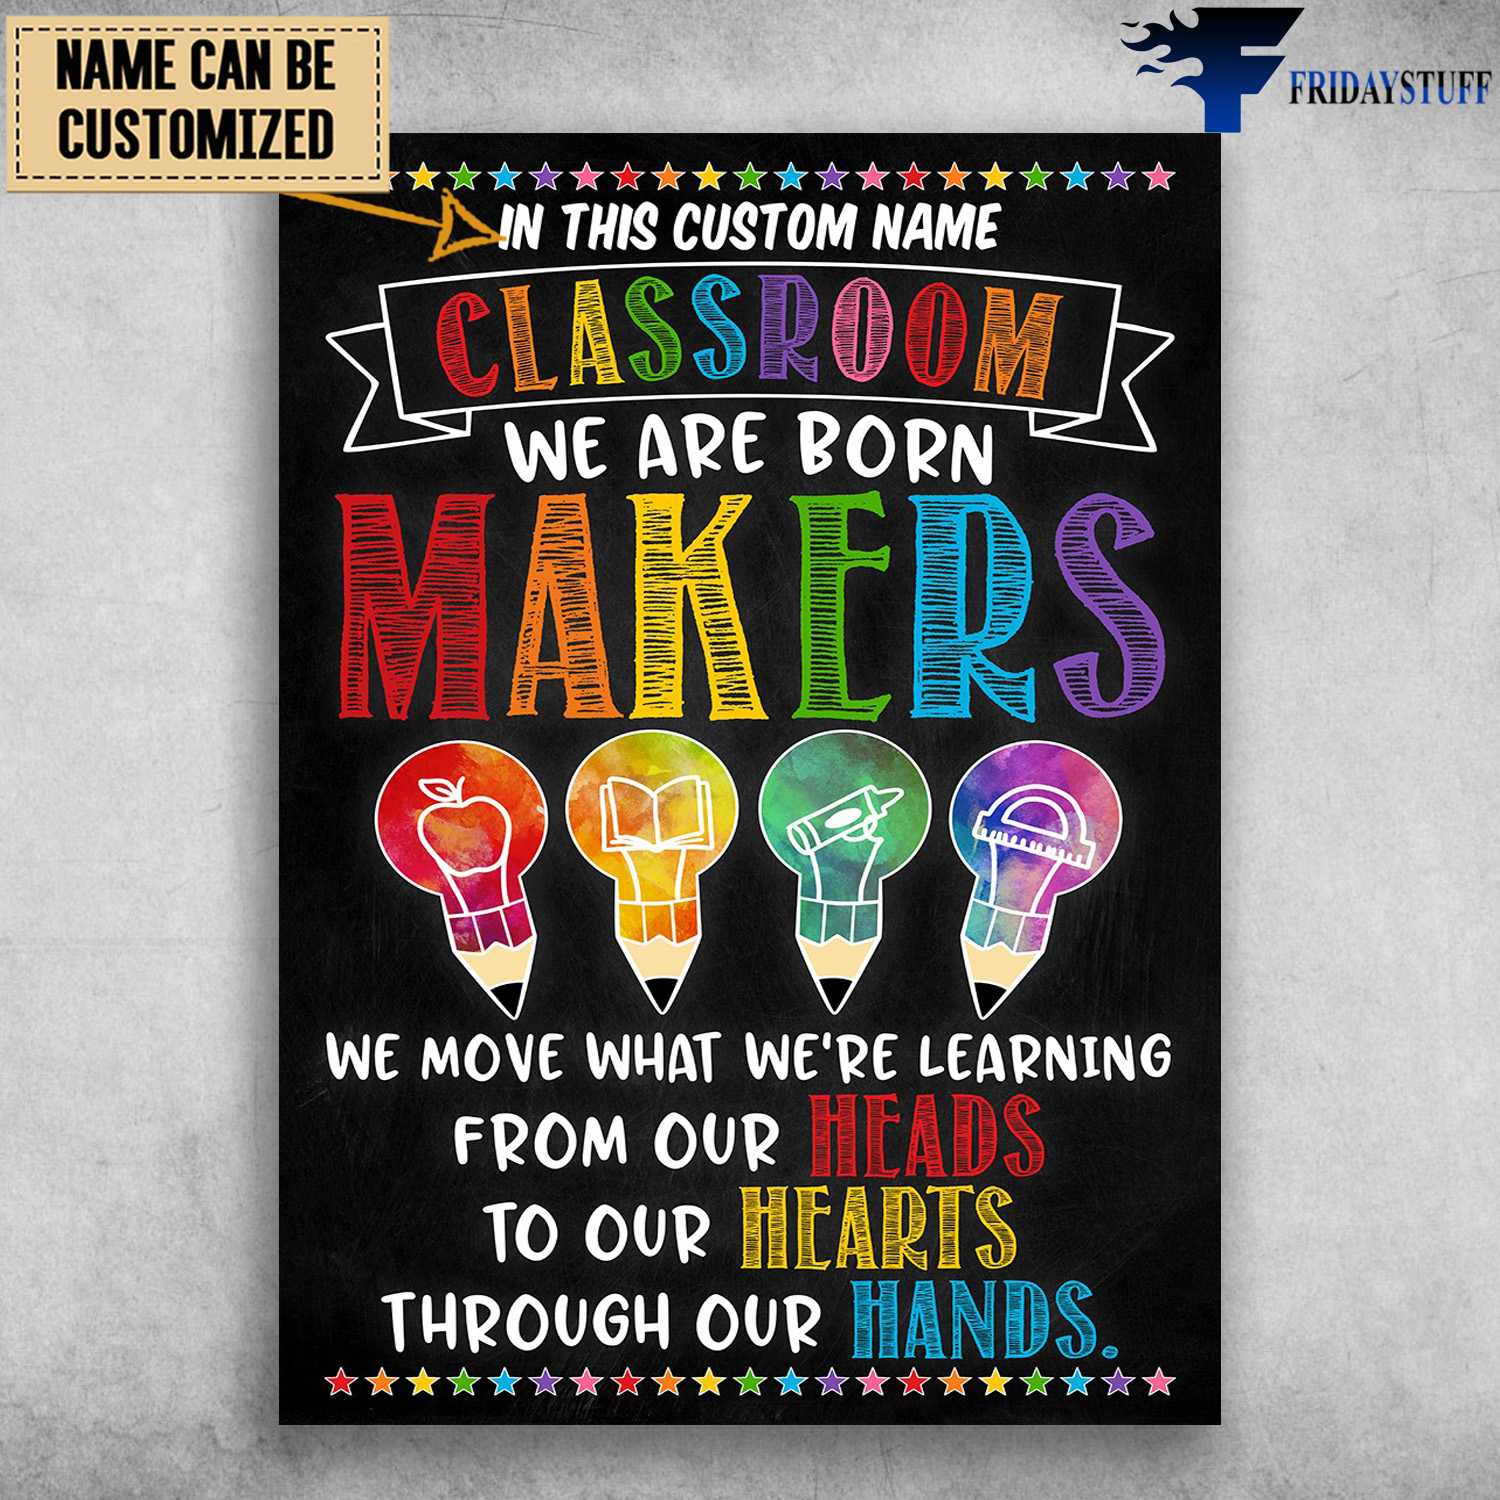 Back To School, In This Classroom, We Are Born Makers, We Move What We're Learning, From Our Heads, To Our Hearts, Through Our Hands